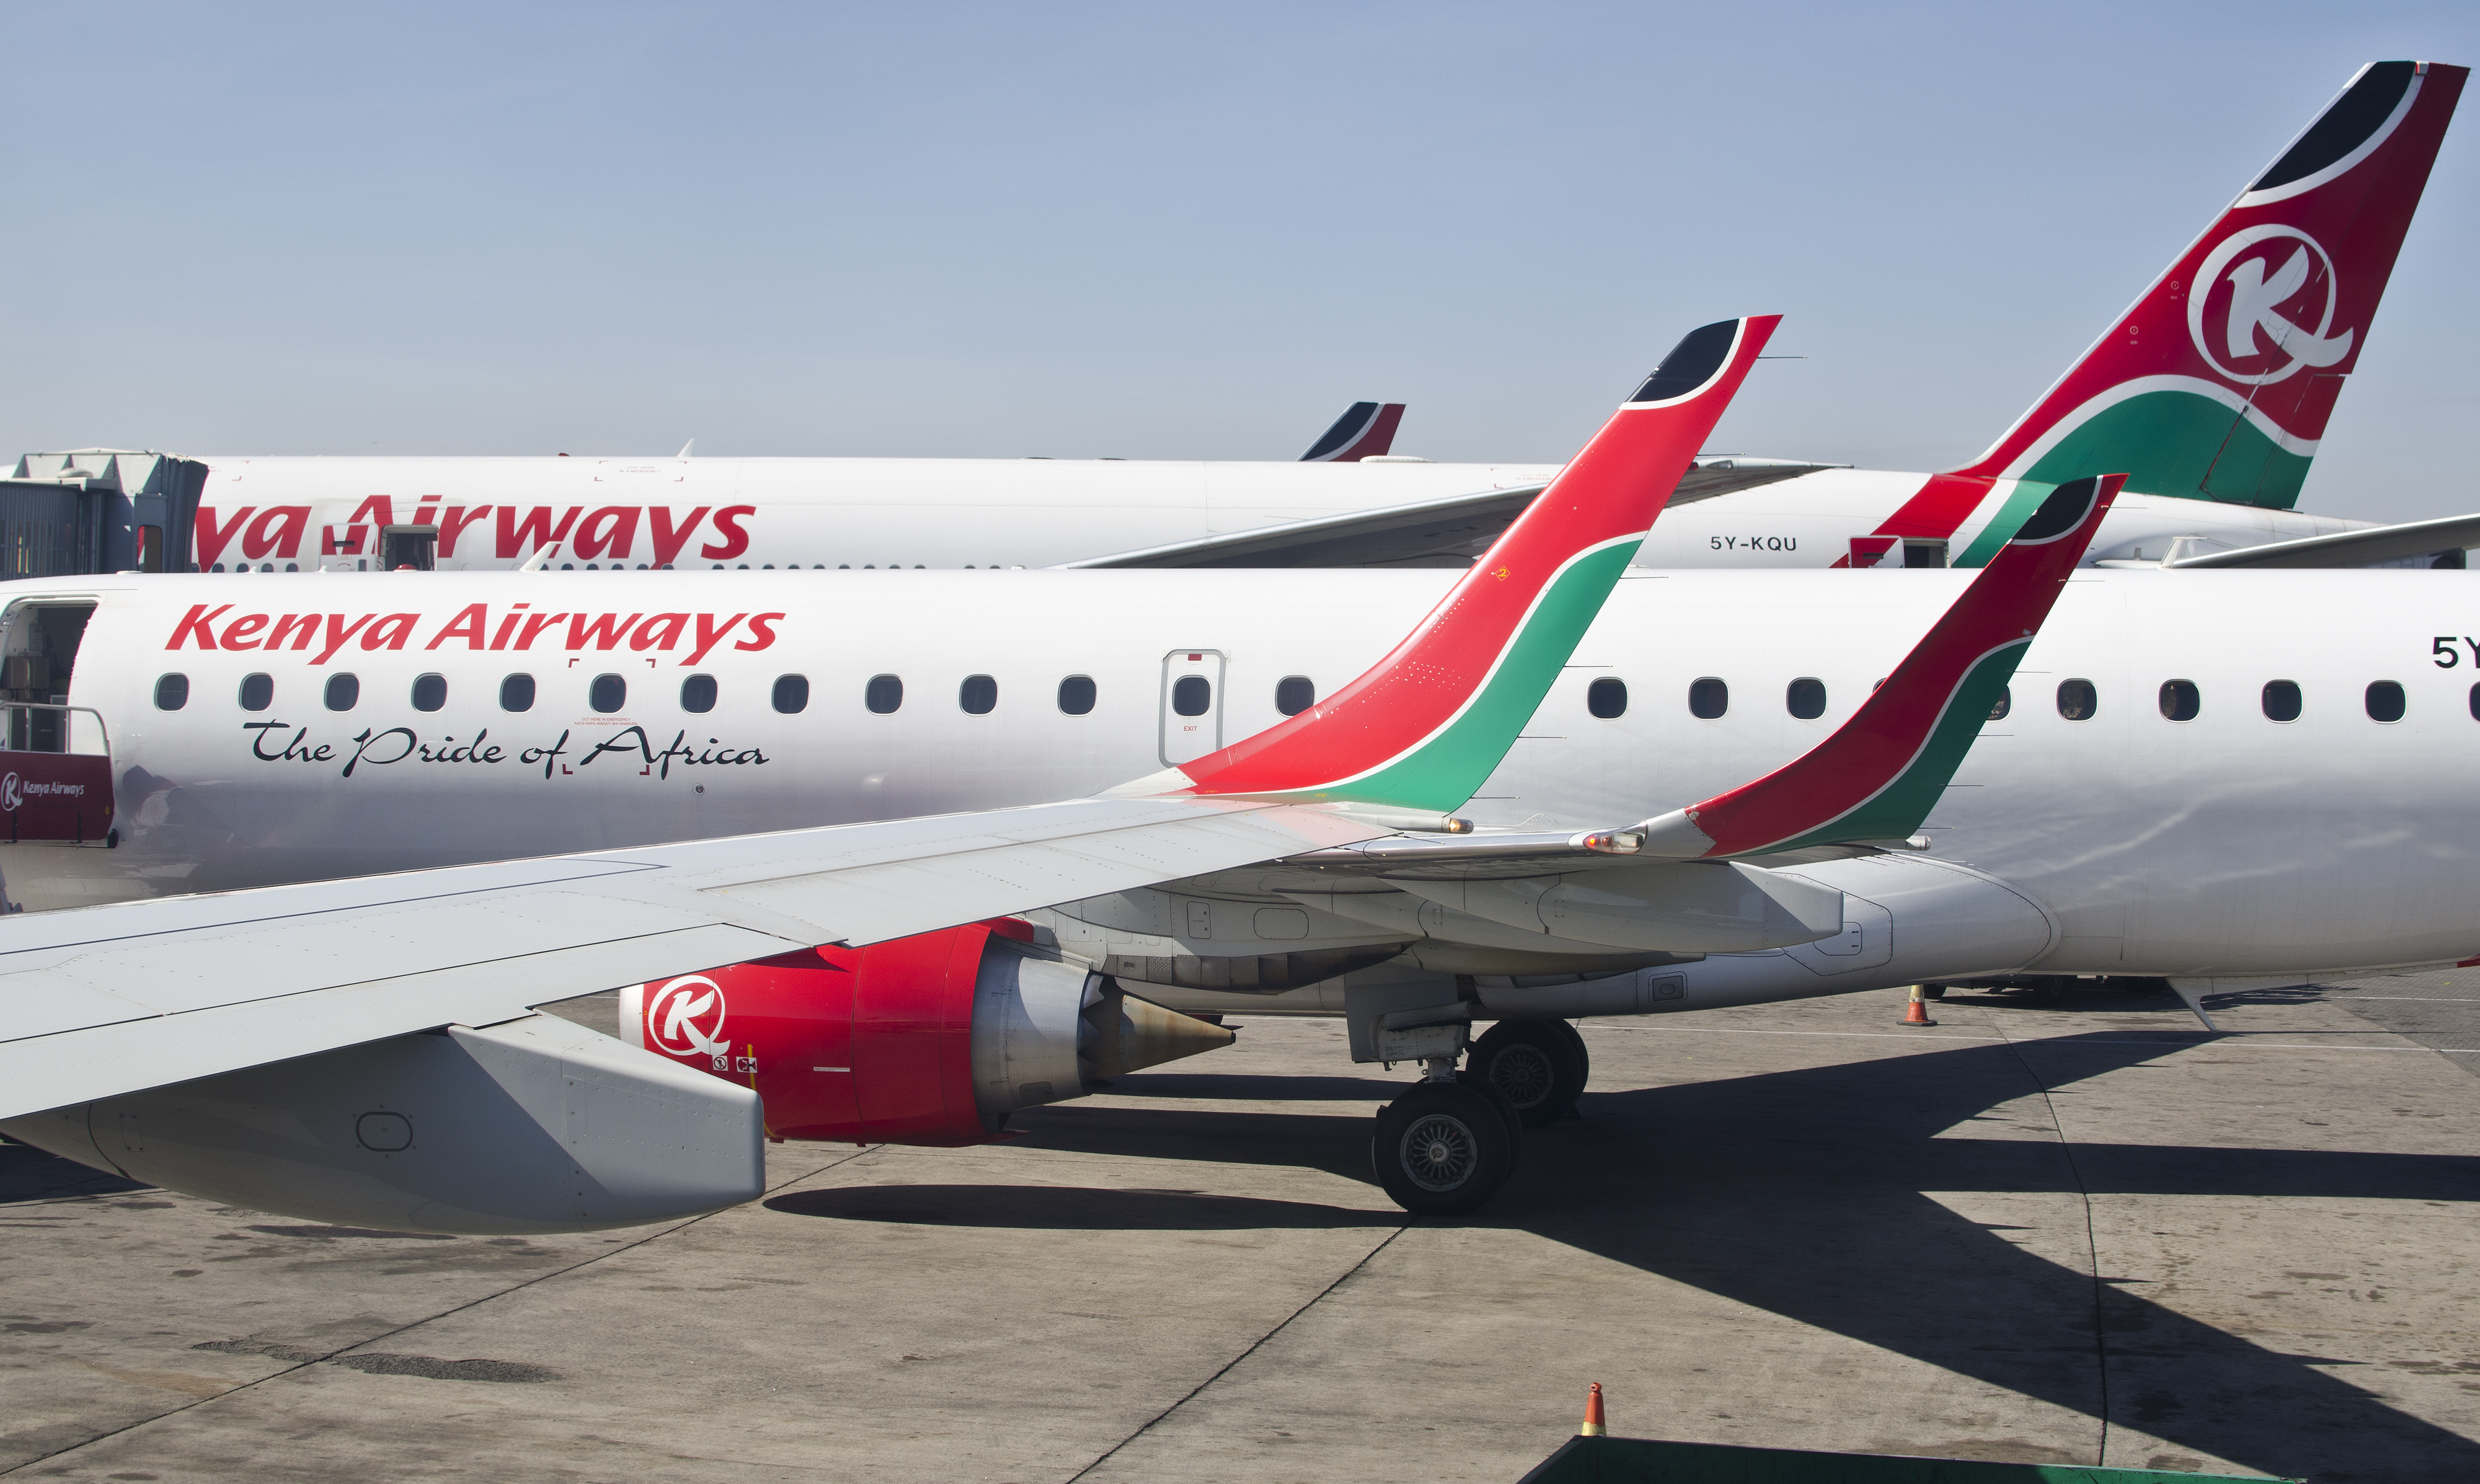 Component support extended for Kenya Airways